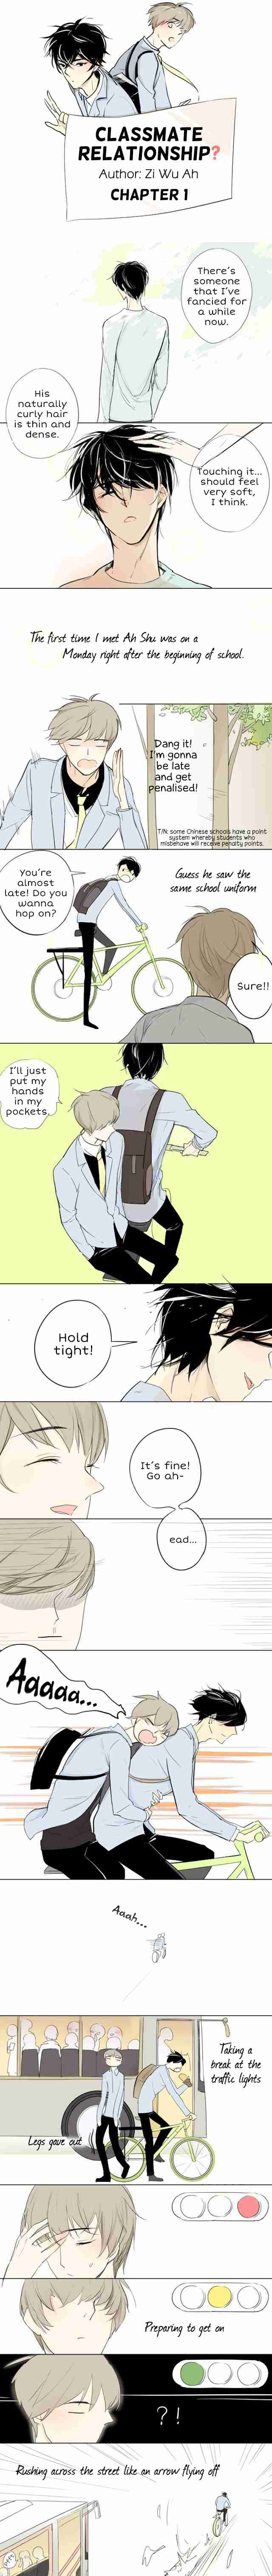 Classmate Relationship? Ch. 1 My Reason for Blushing